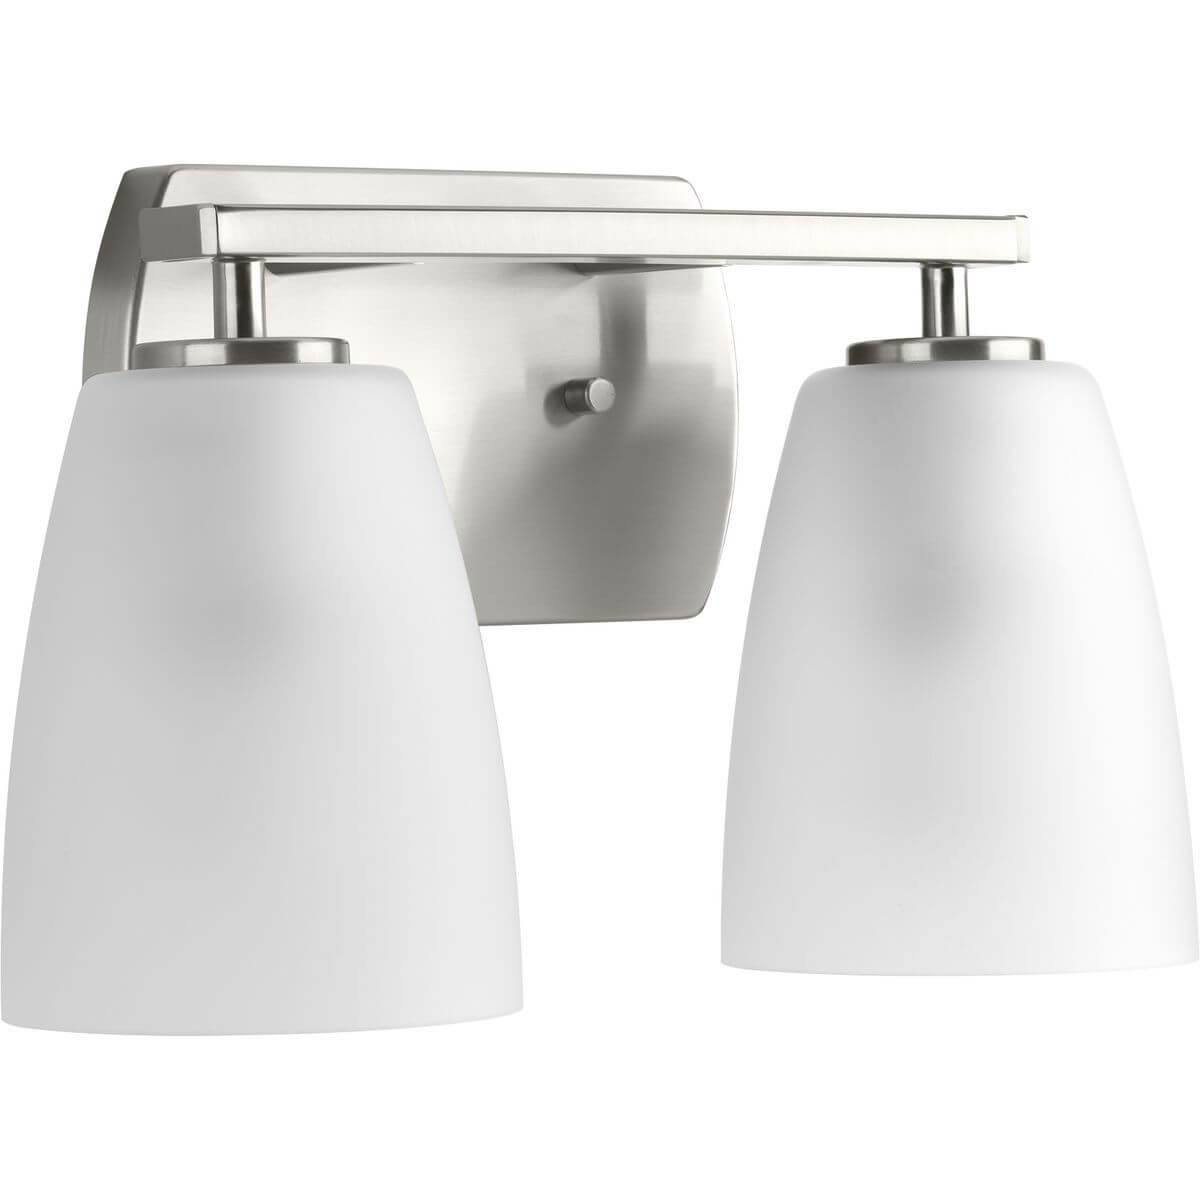 Progress Lighting Leap 2 Light 14 inch Bath Vanity Light in Brushed Nickel with Etched Glass P300132-009